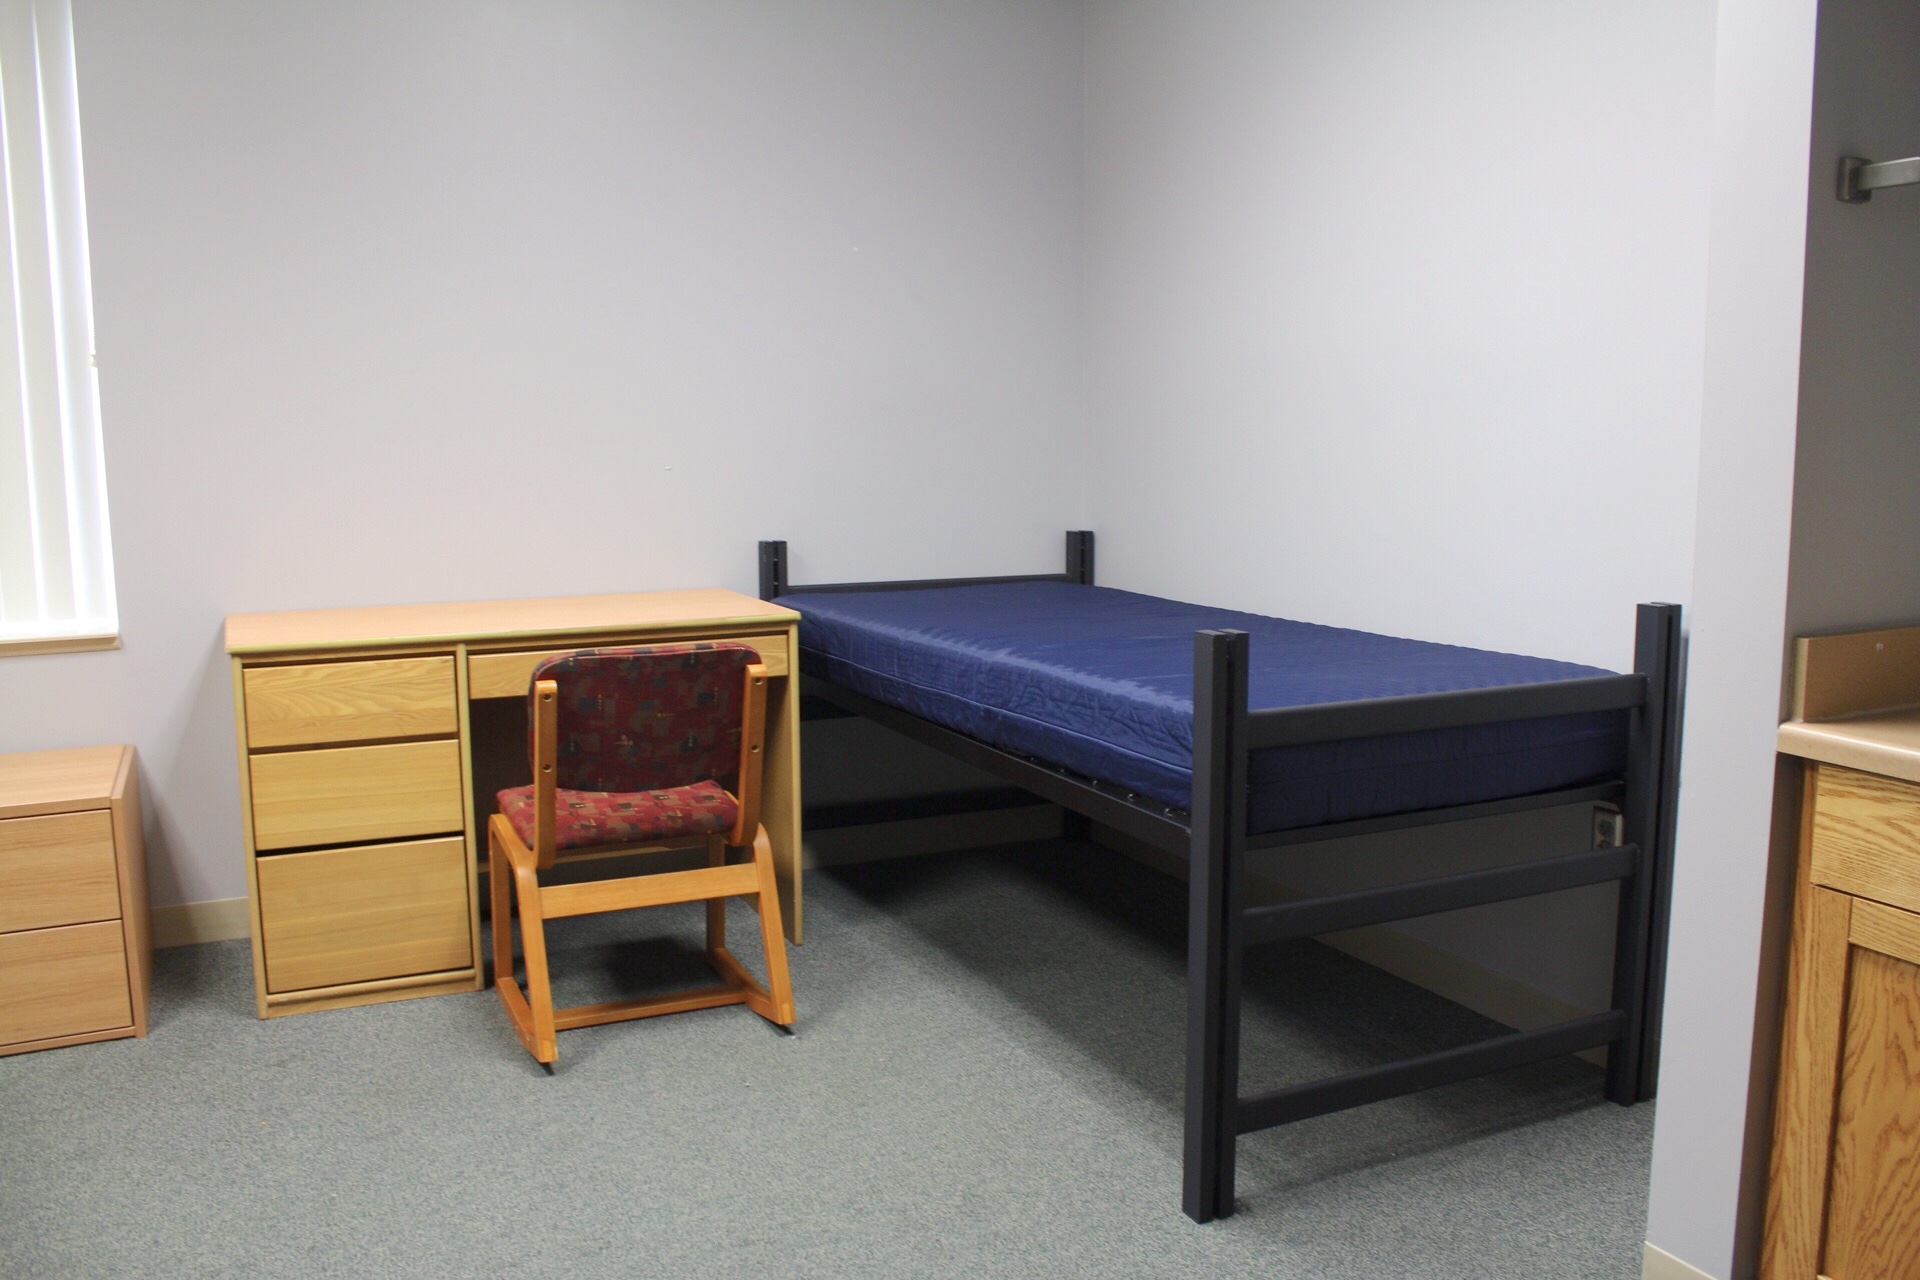 Morgan Hall room showing mattress and frame, desk and chair.